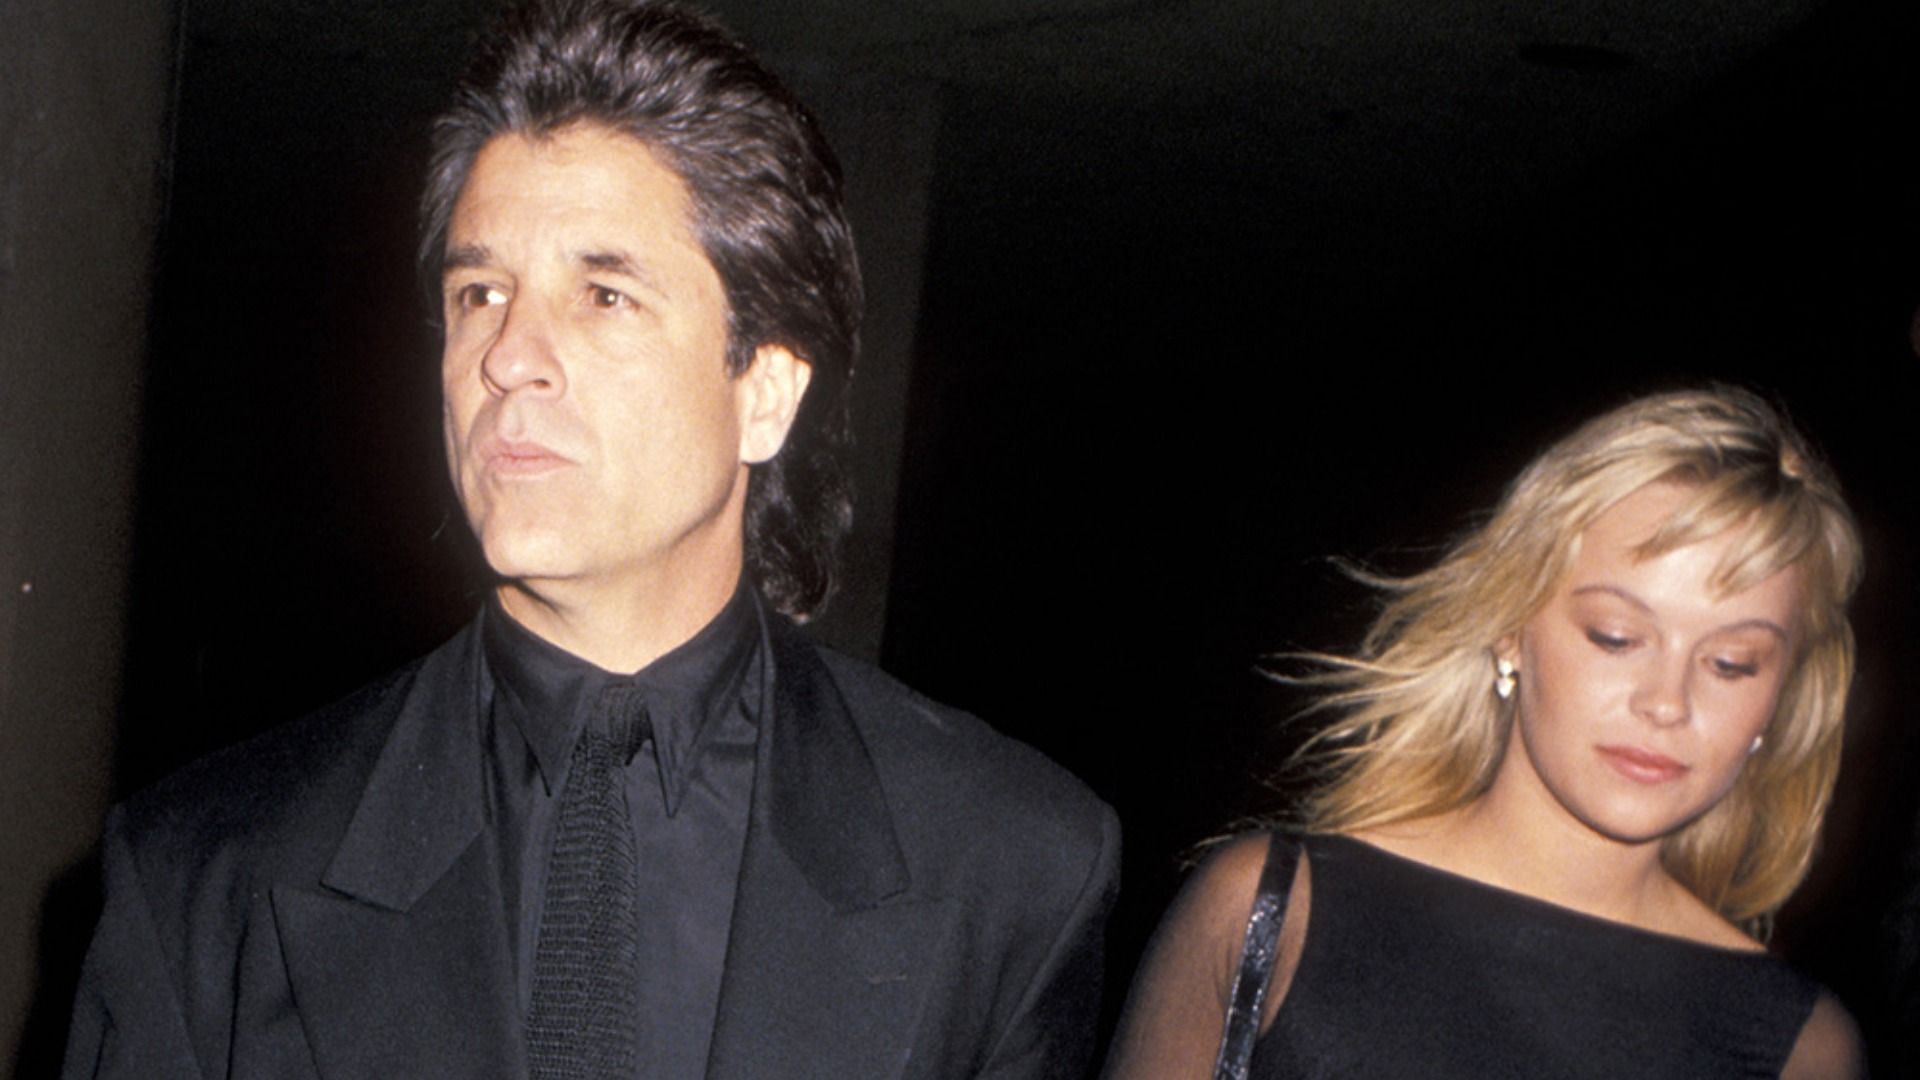 Pamela Anderson and Jon Peters (Image via Getty Images/ Ron Galella)